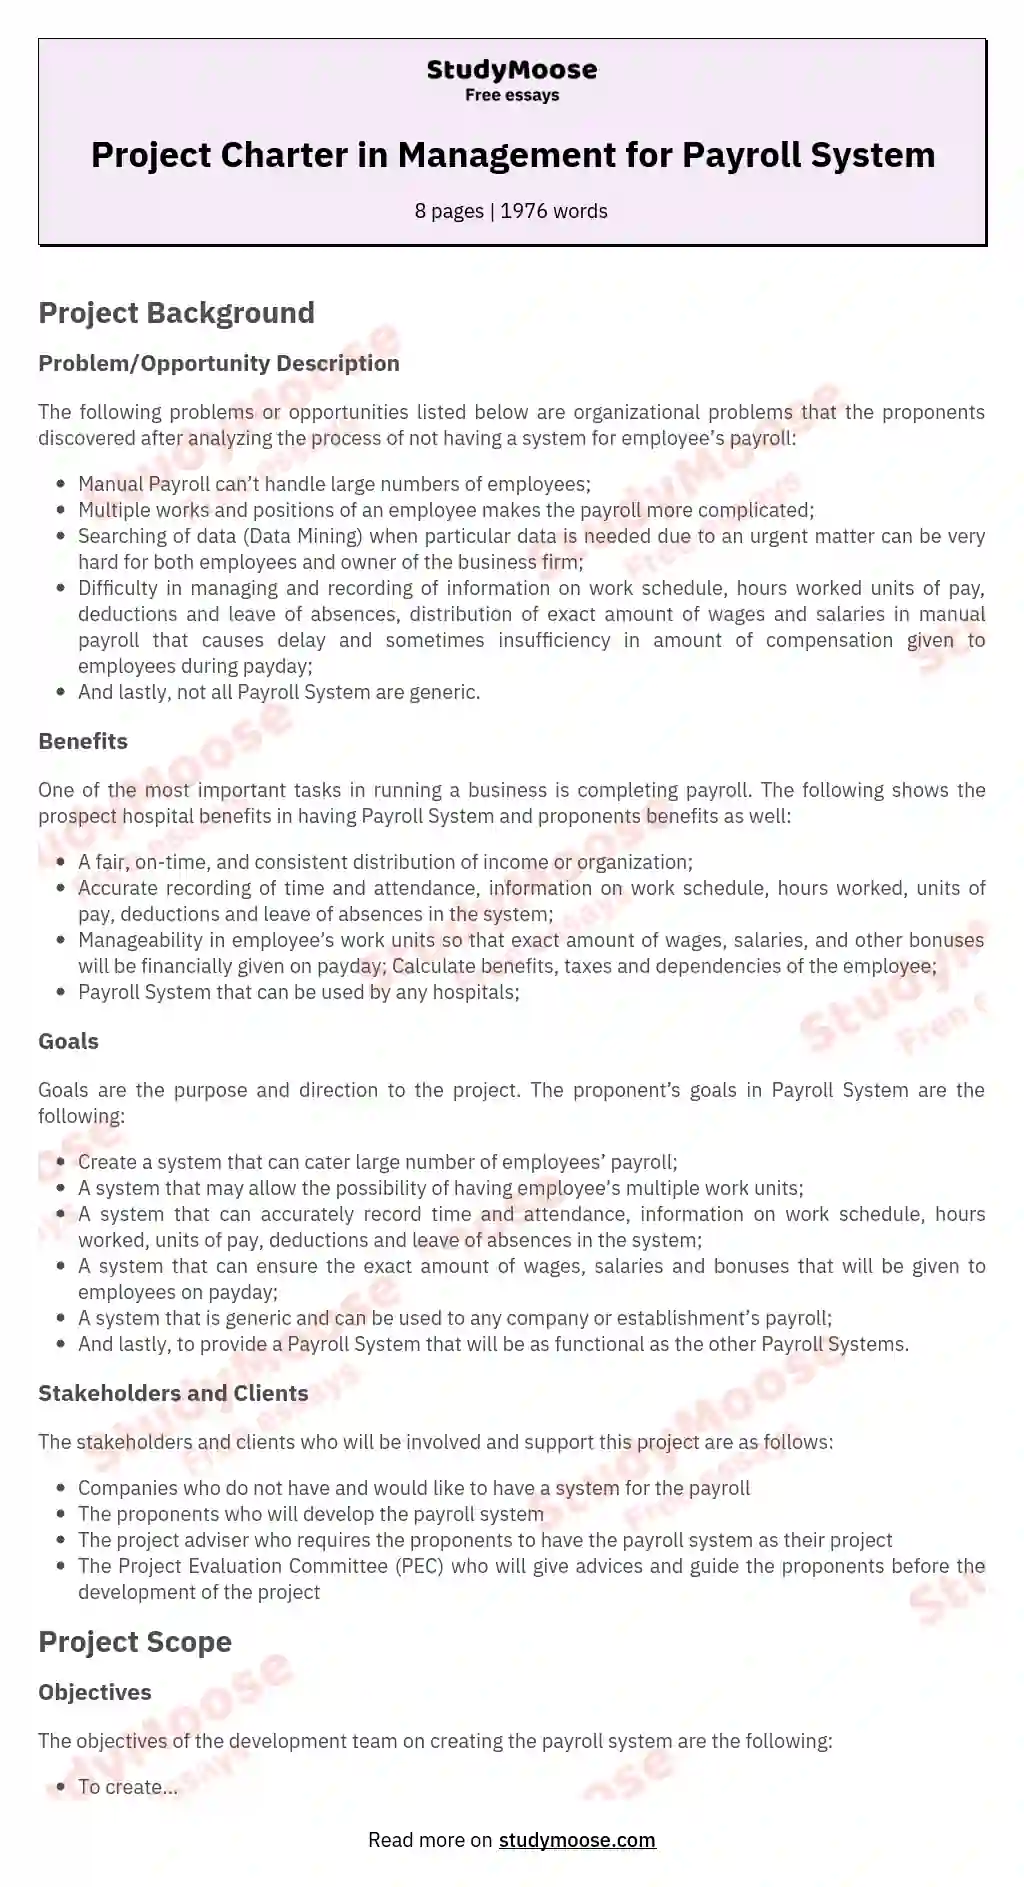 Project Charter in Management for Payroll System essay